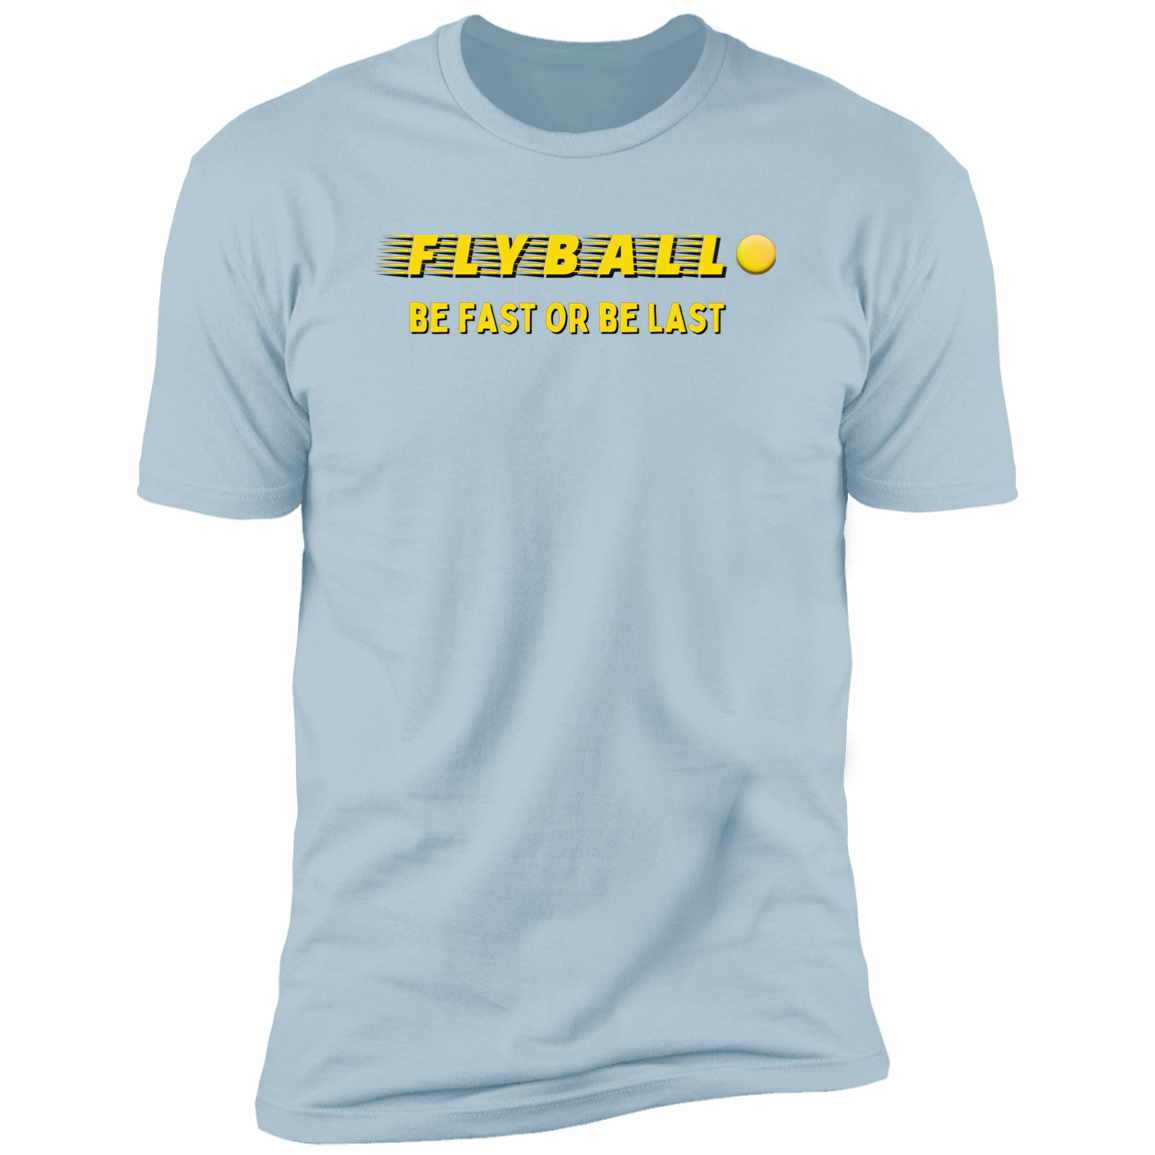 Flyball Be Fast or Be Last Dog Sport T-shirt, Flyball Shirt for humans, in light blue